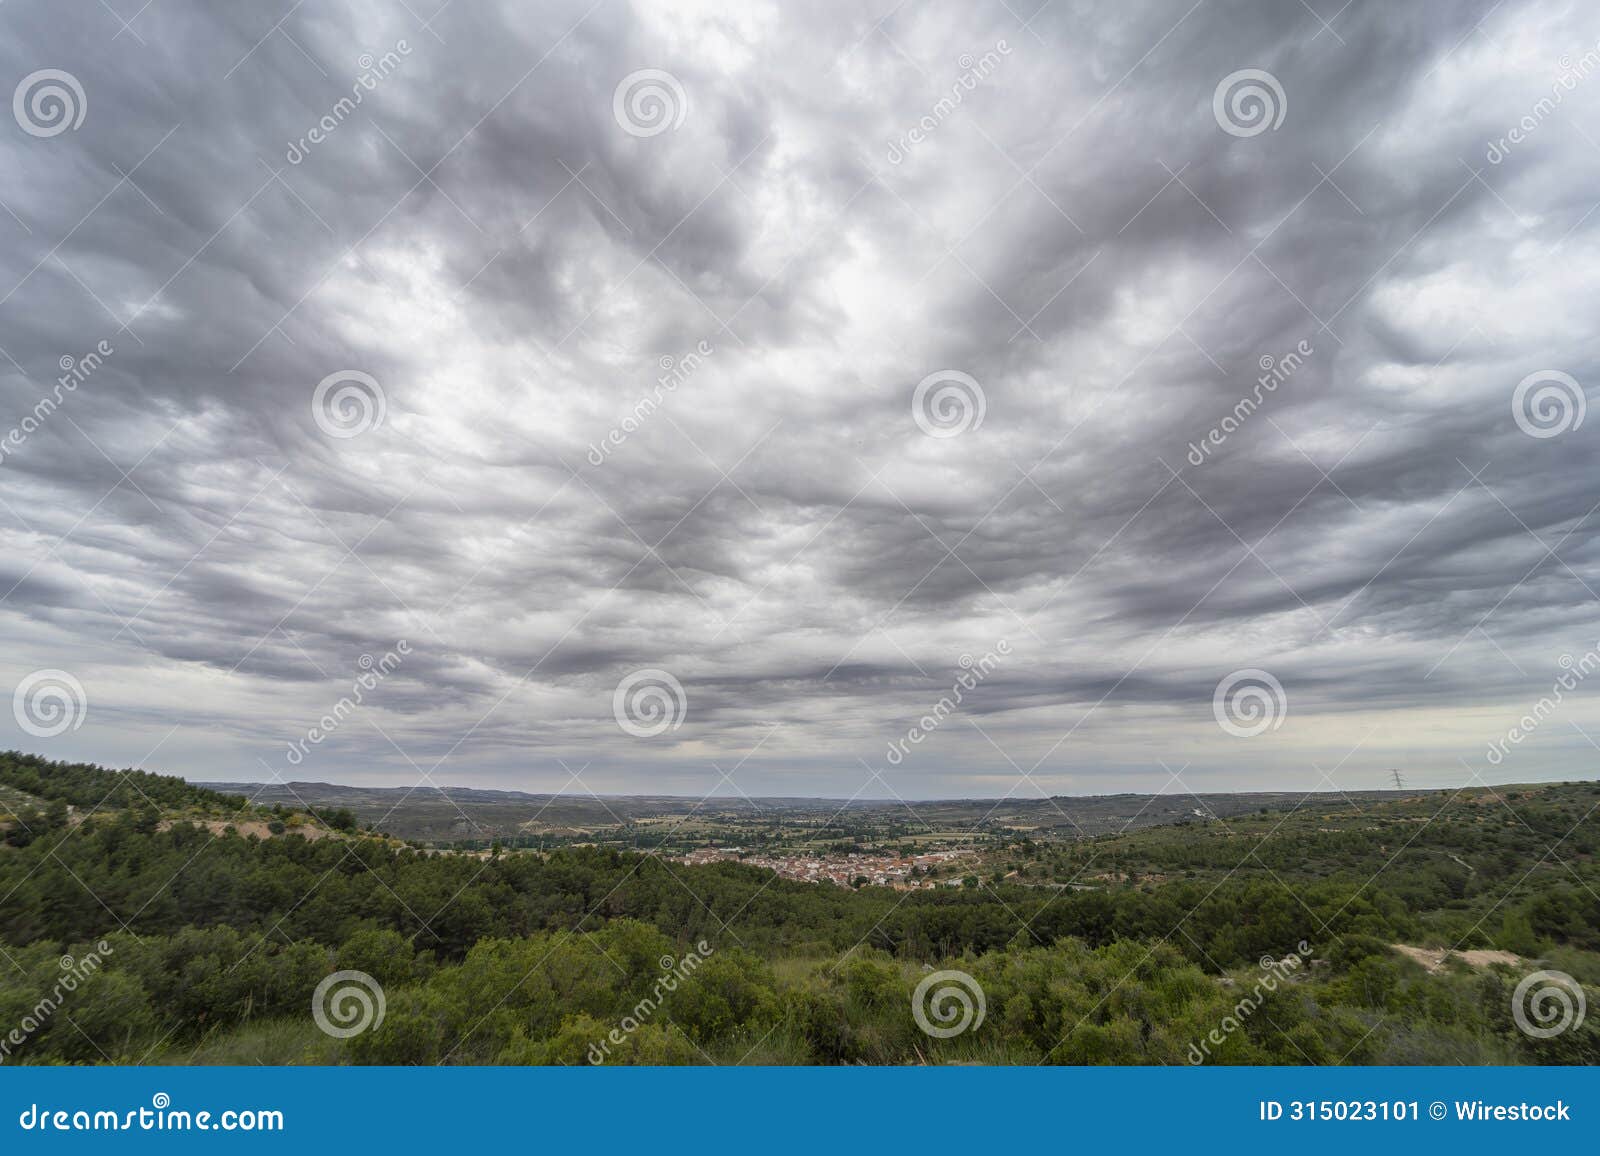 scenic tajuna valley under a dark gray sky, dotted with asperitas clouds